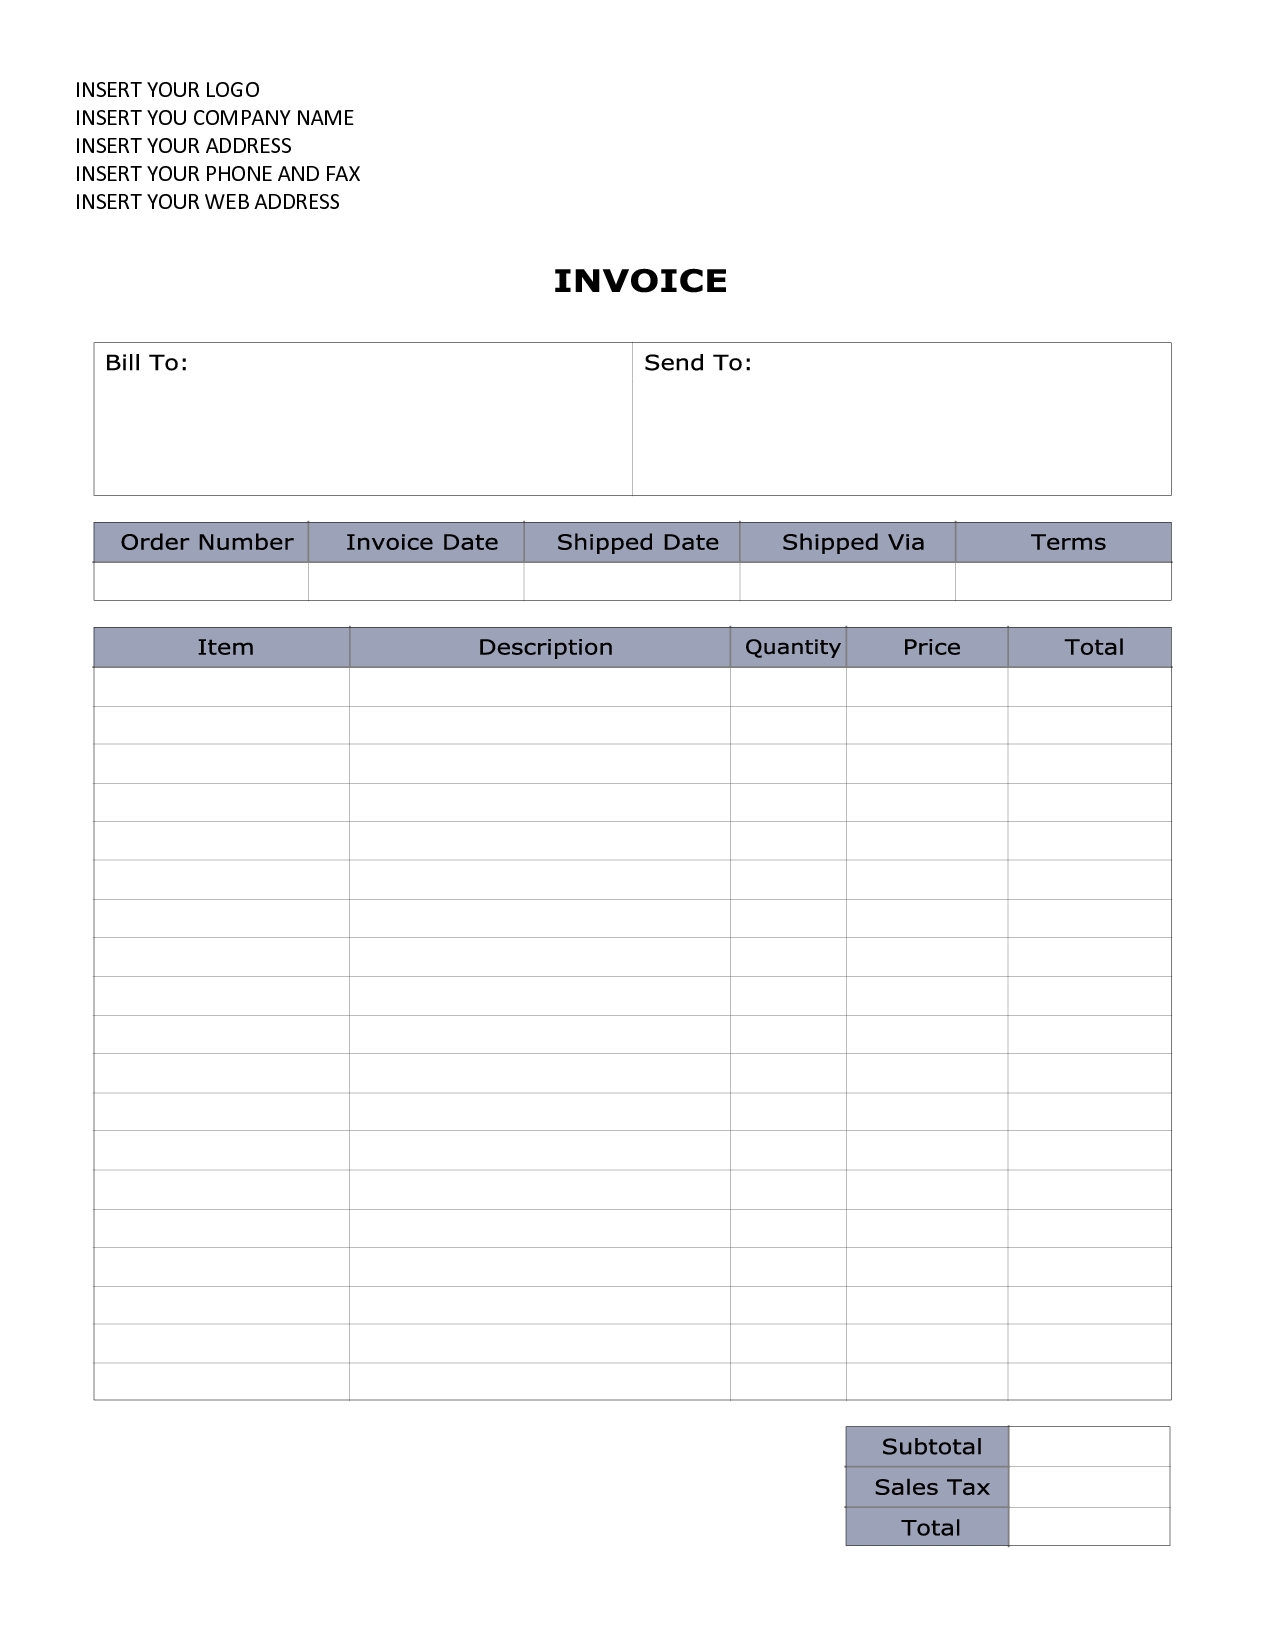 photo free word invoice template download images invoice word template free